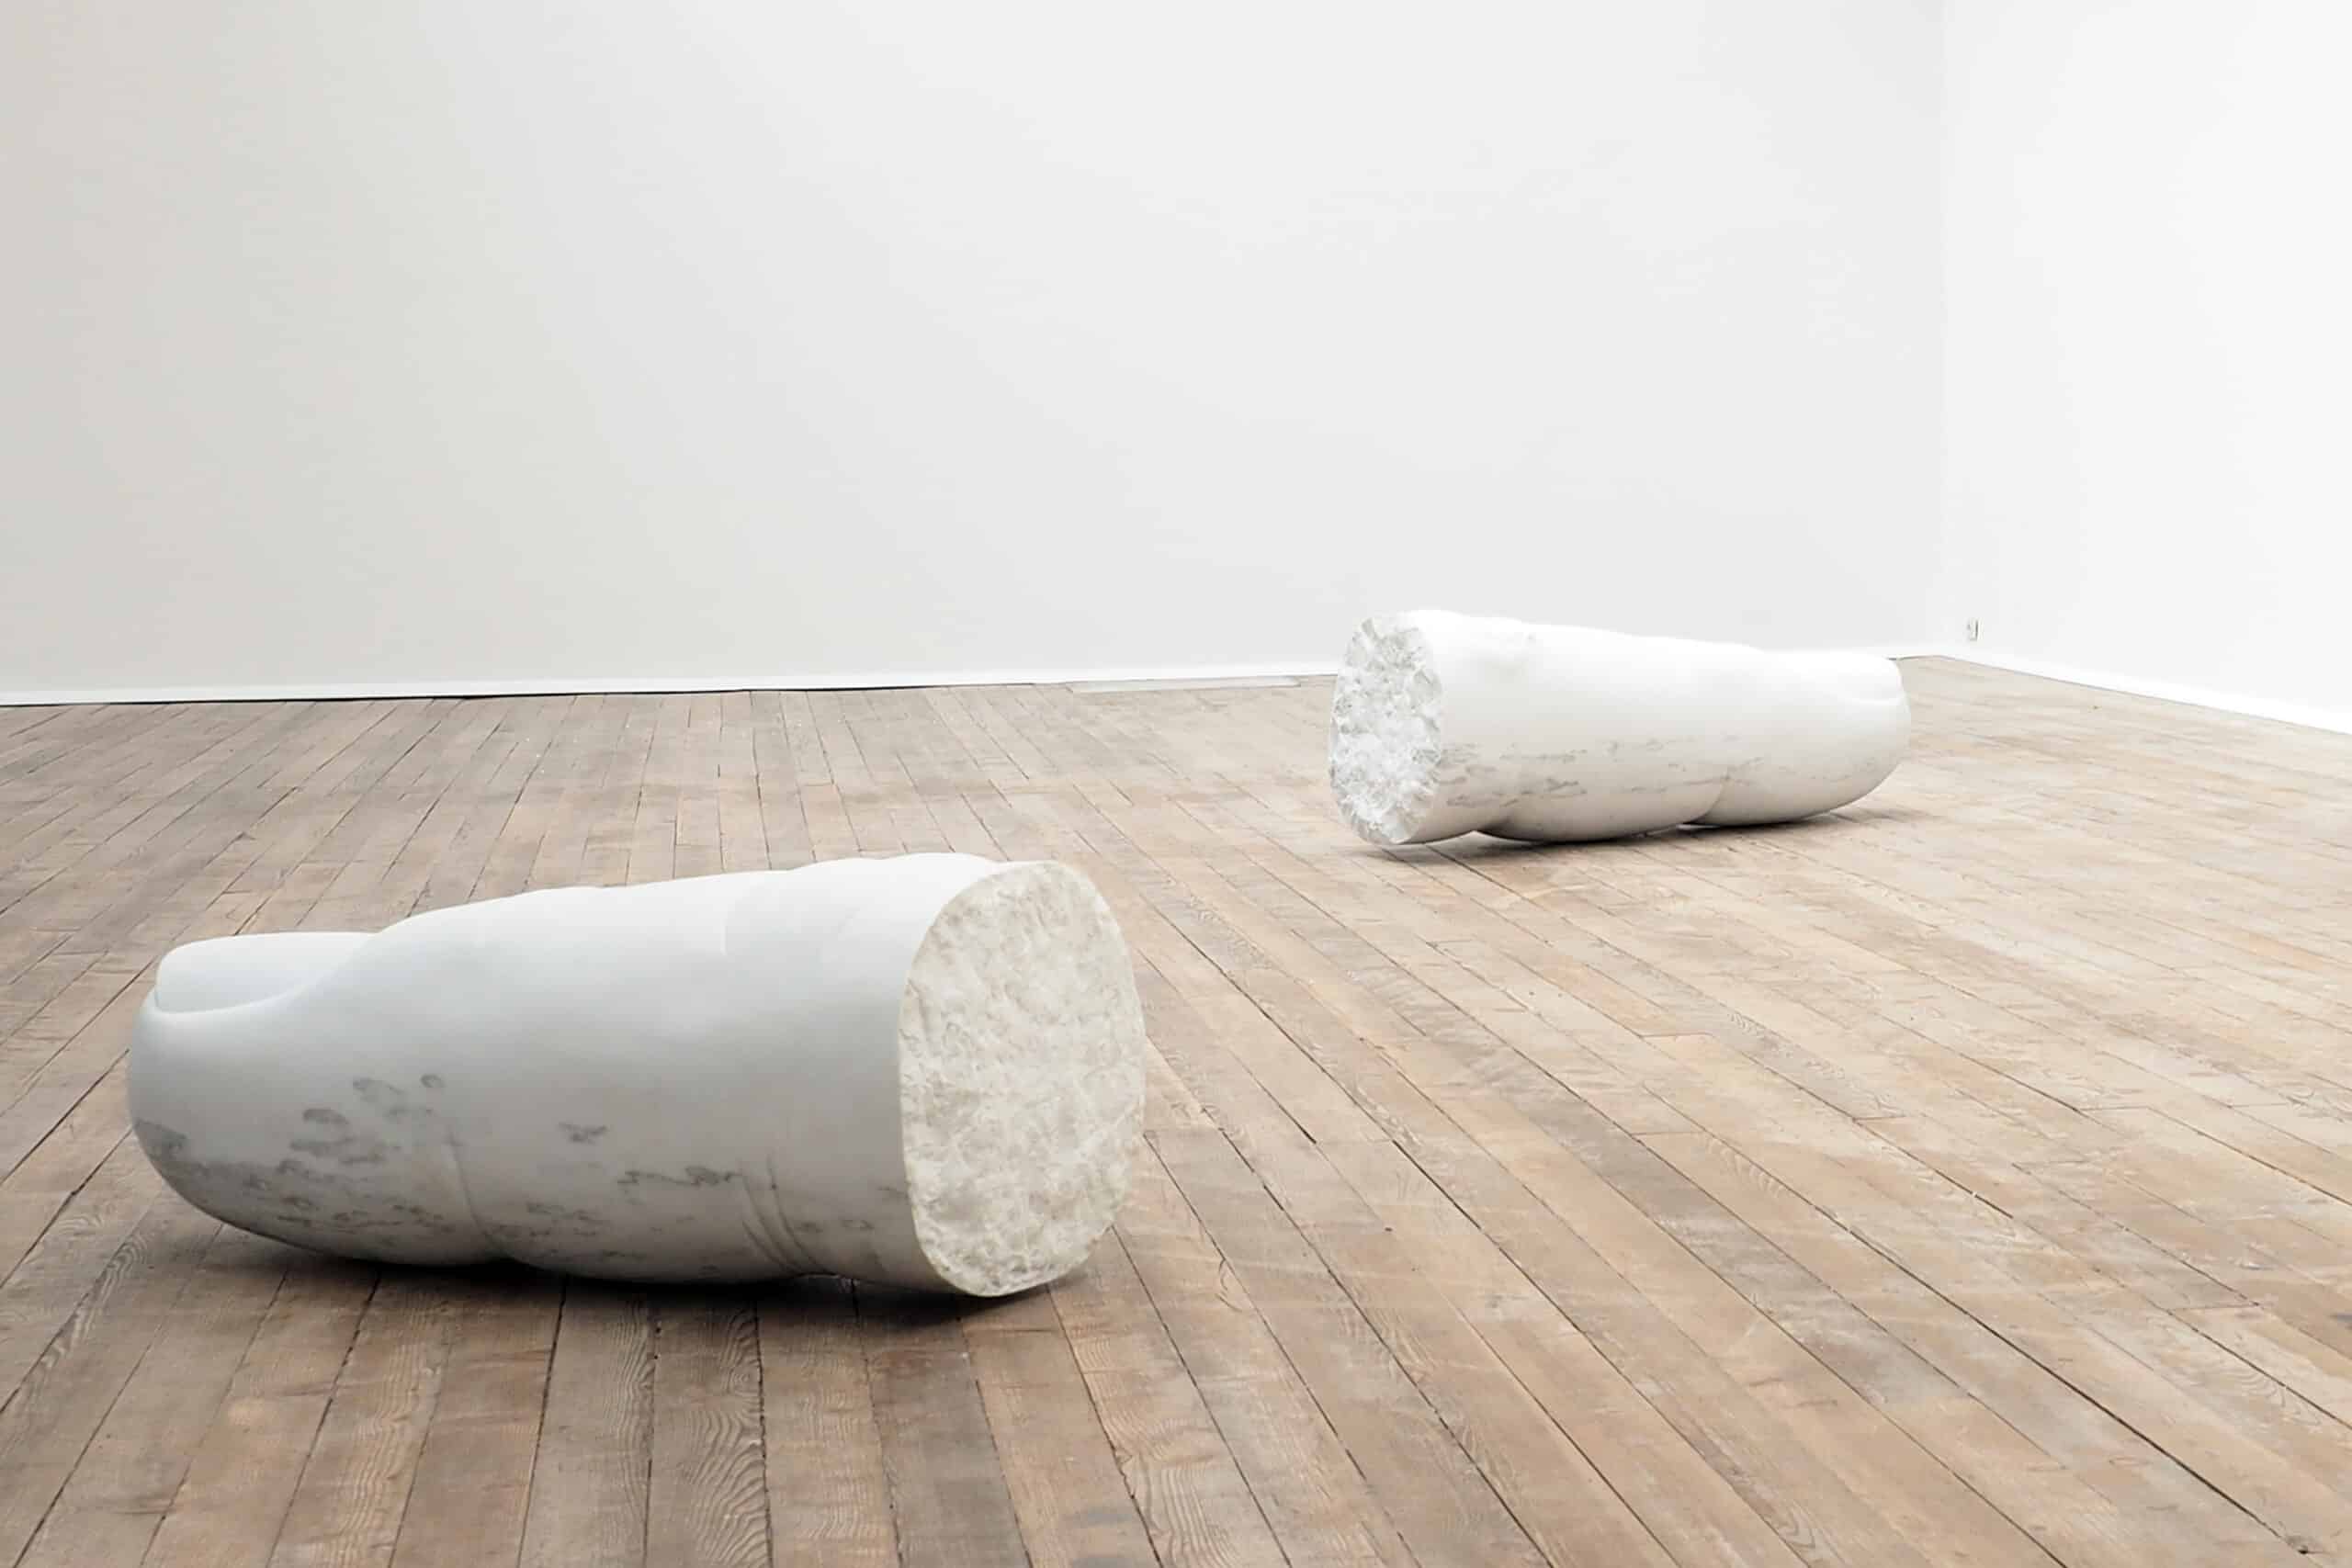 JONATHAN MONK | F. I. N. G. E. R. S. (I, II, III), 2015 | White Carrara marble (Bianco P) | Exhibition View